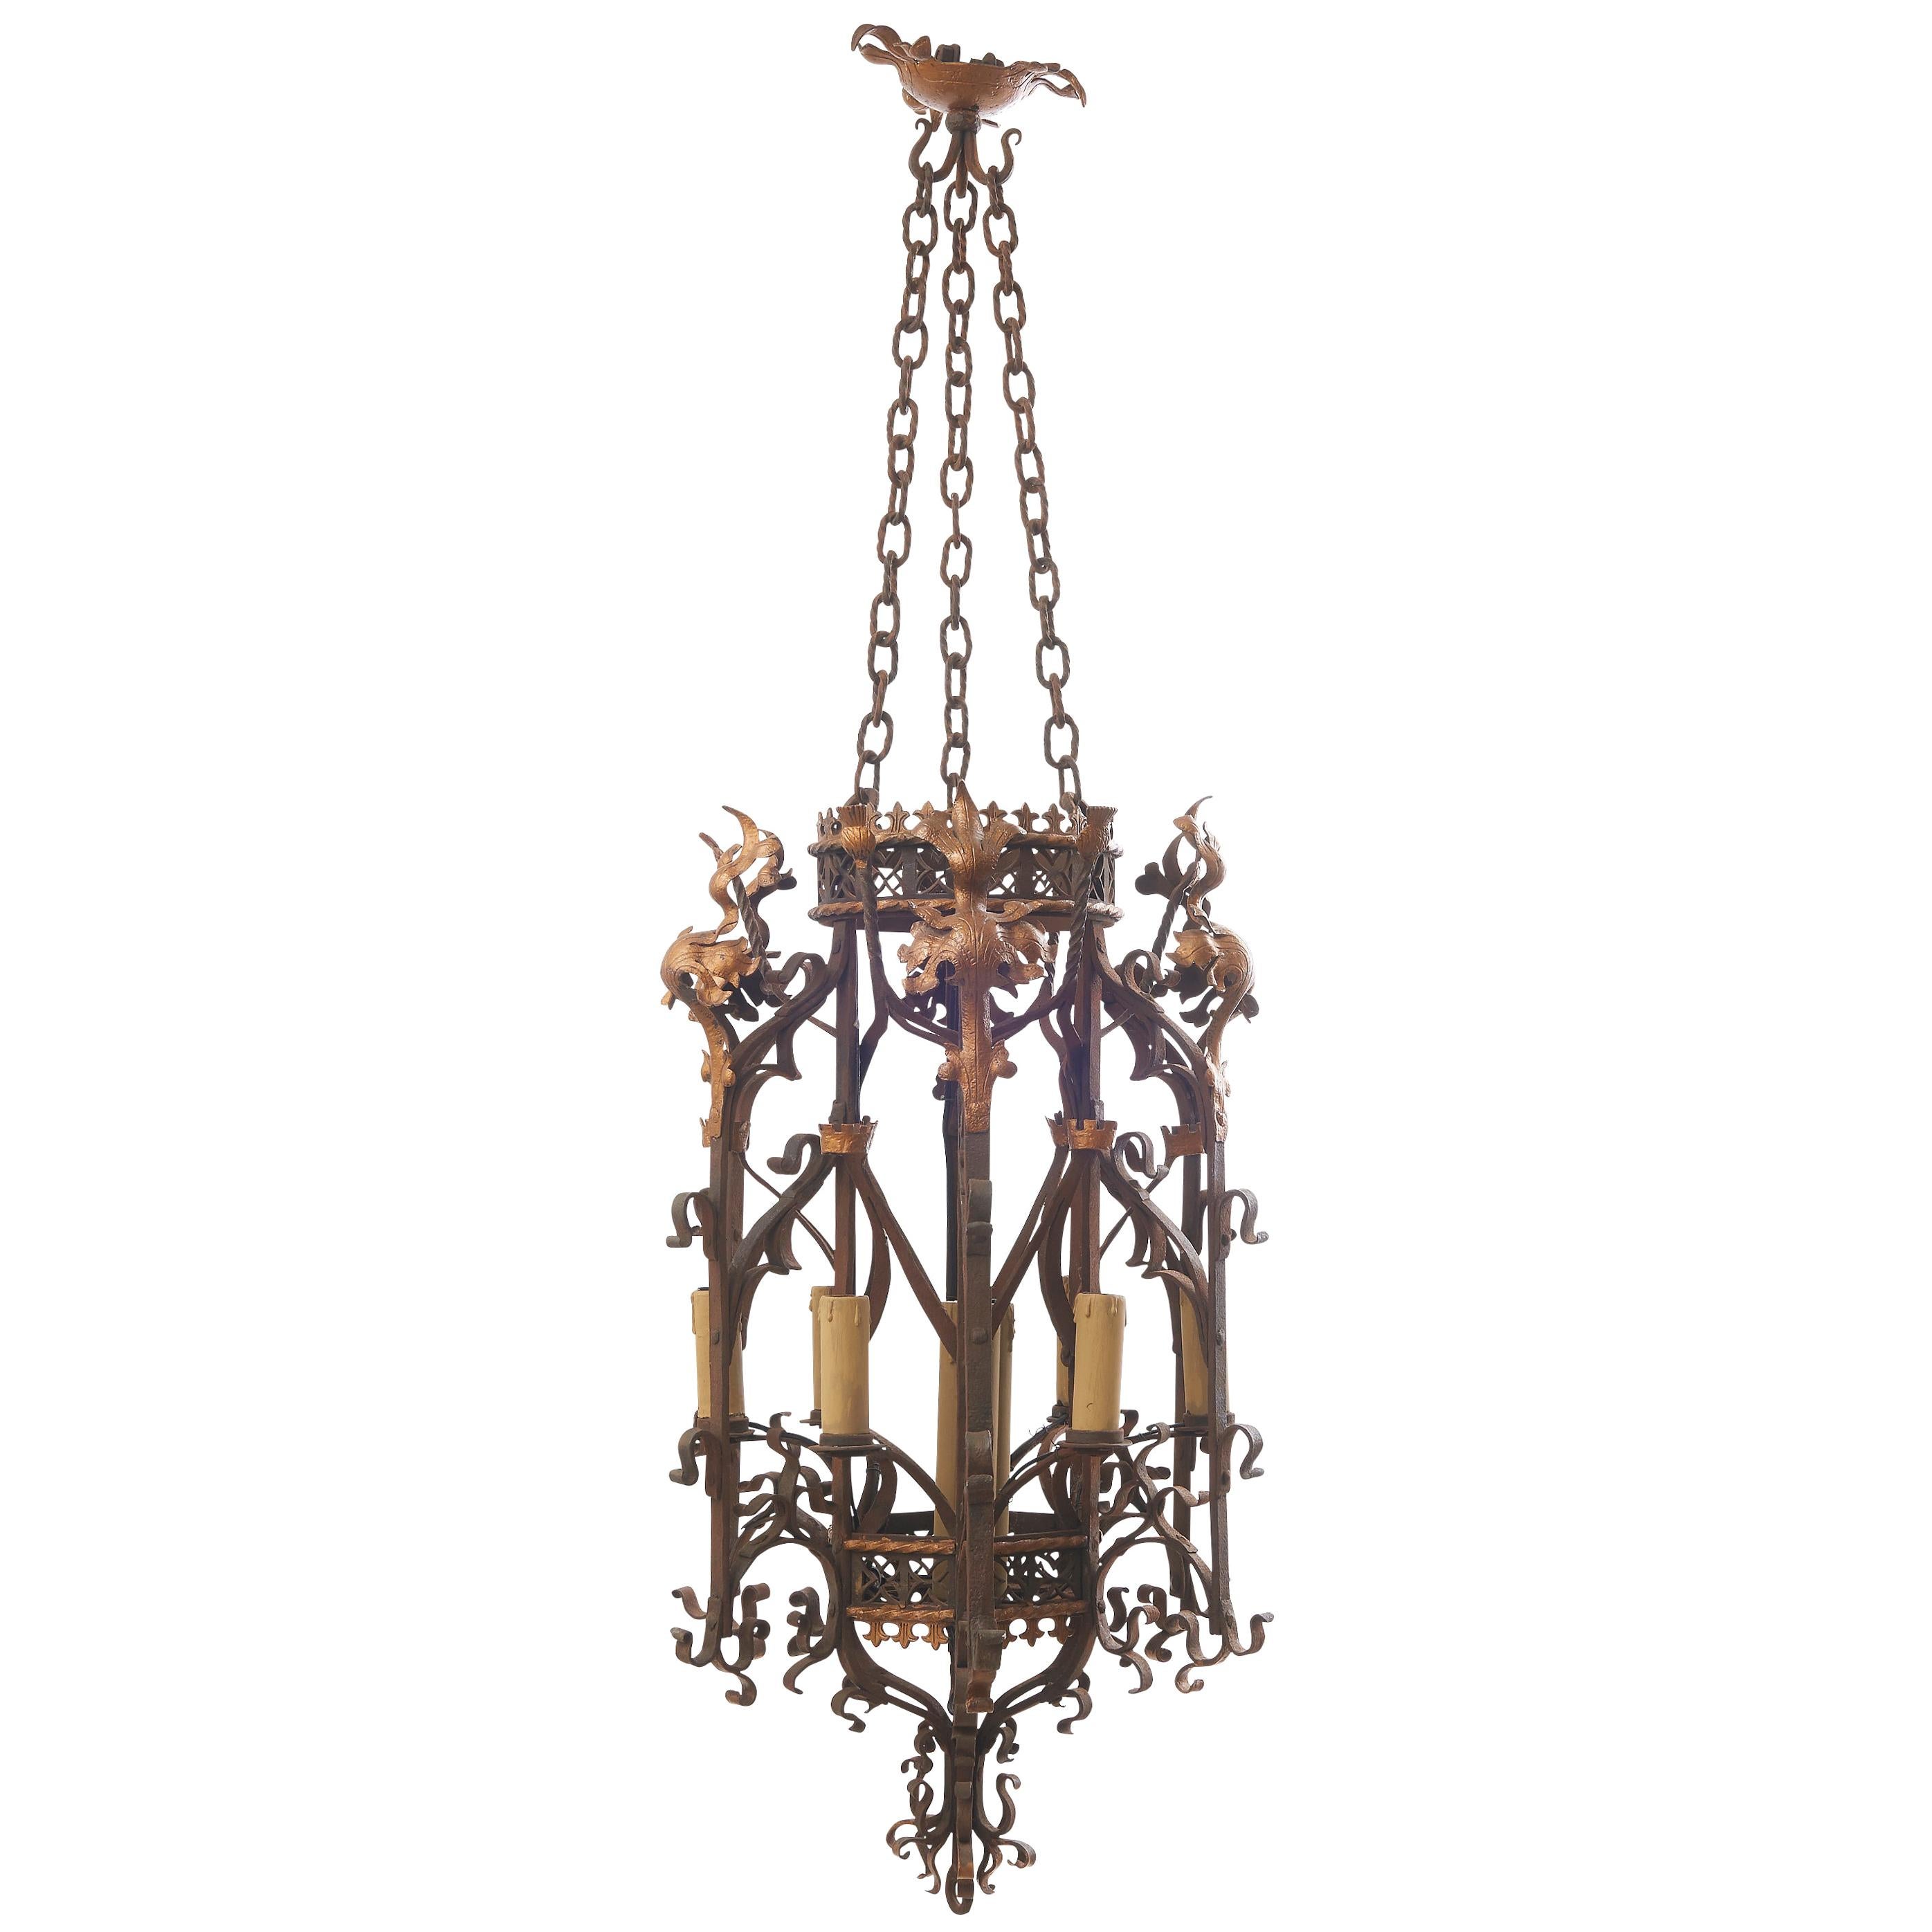 Gothic Revivalist Style Wrought Iron Lantern, French, circa 1900 For Sale